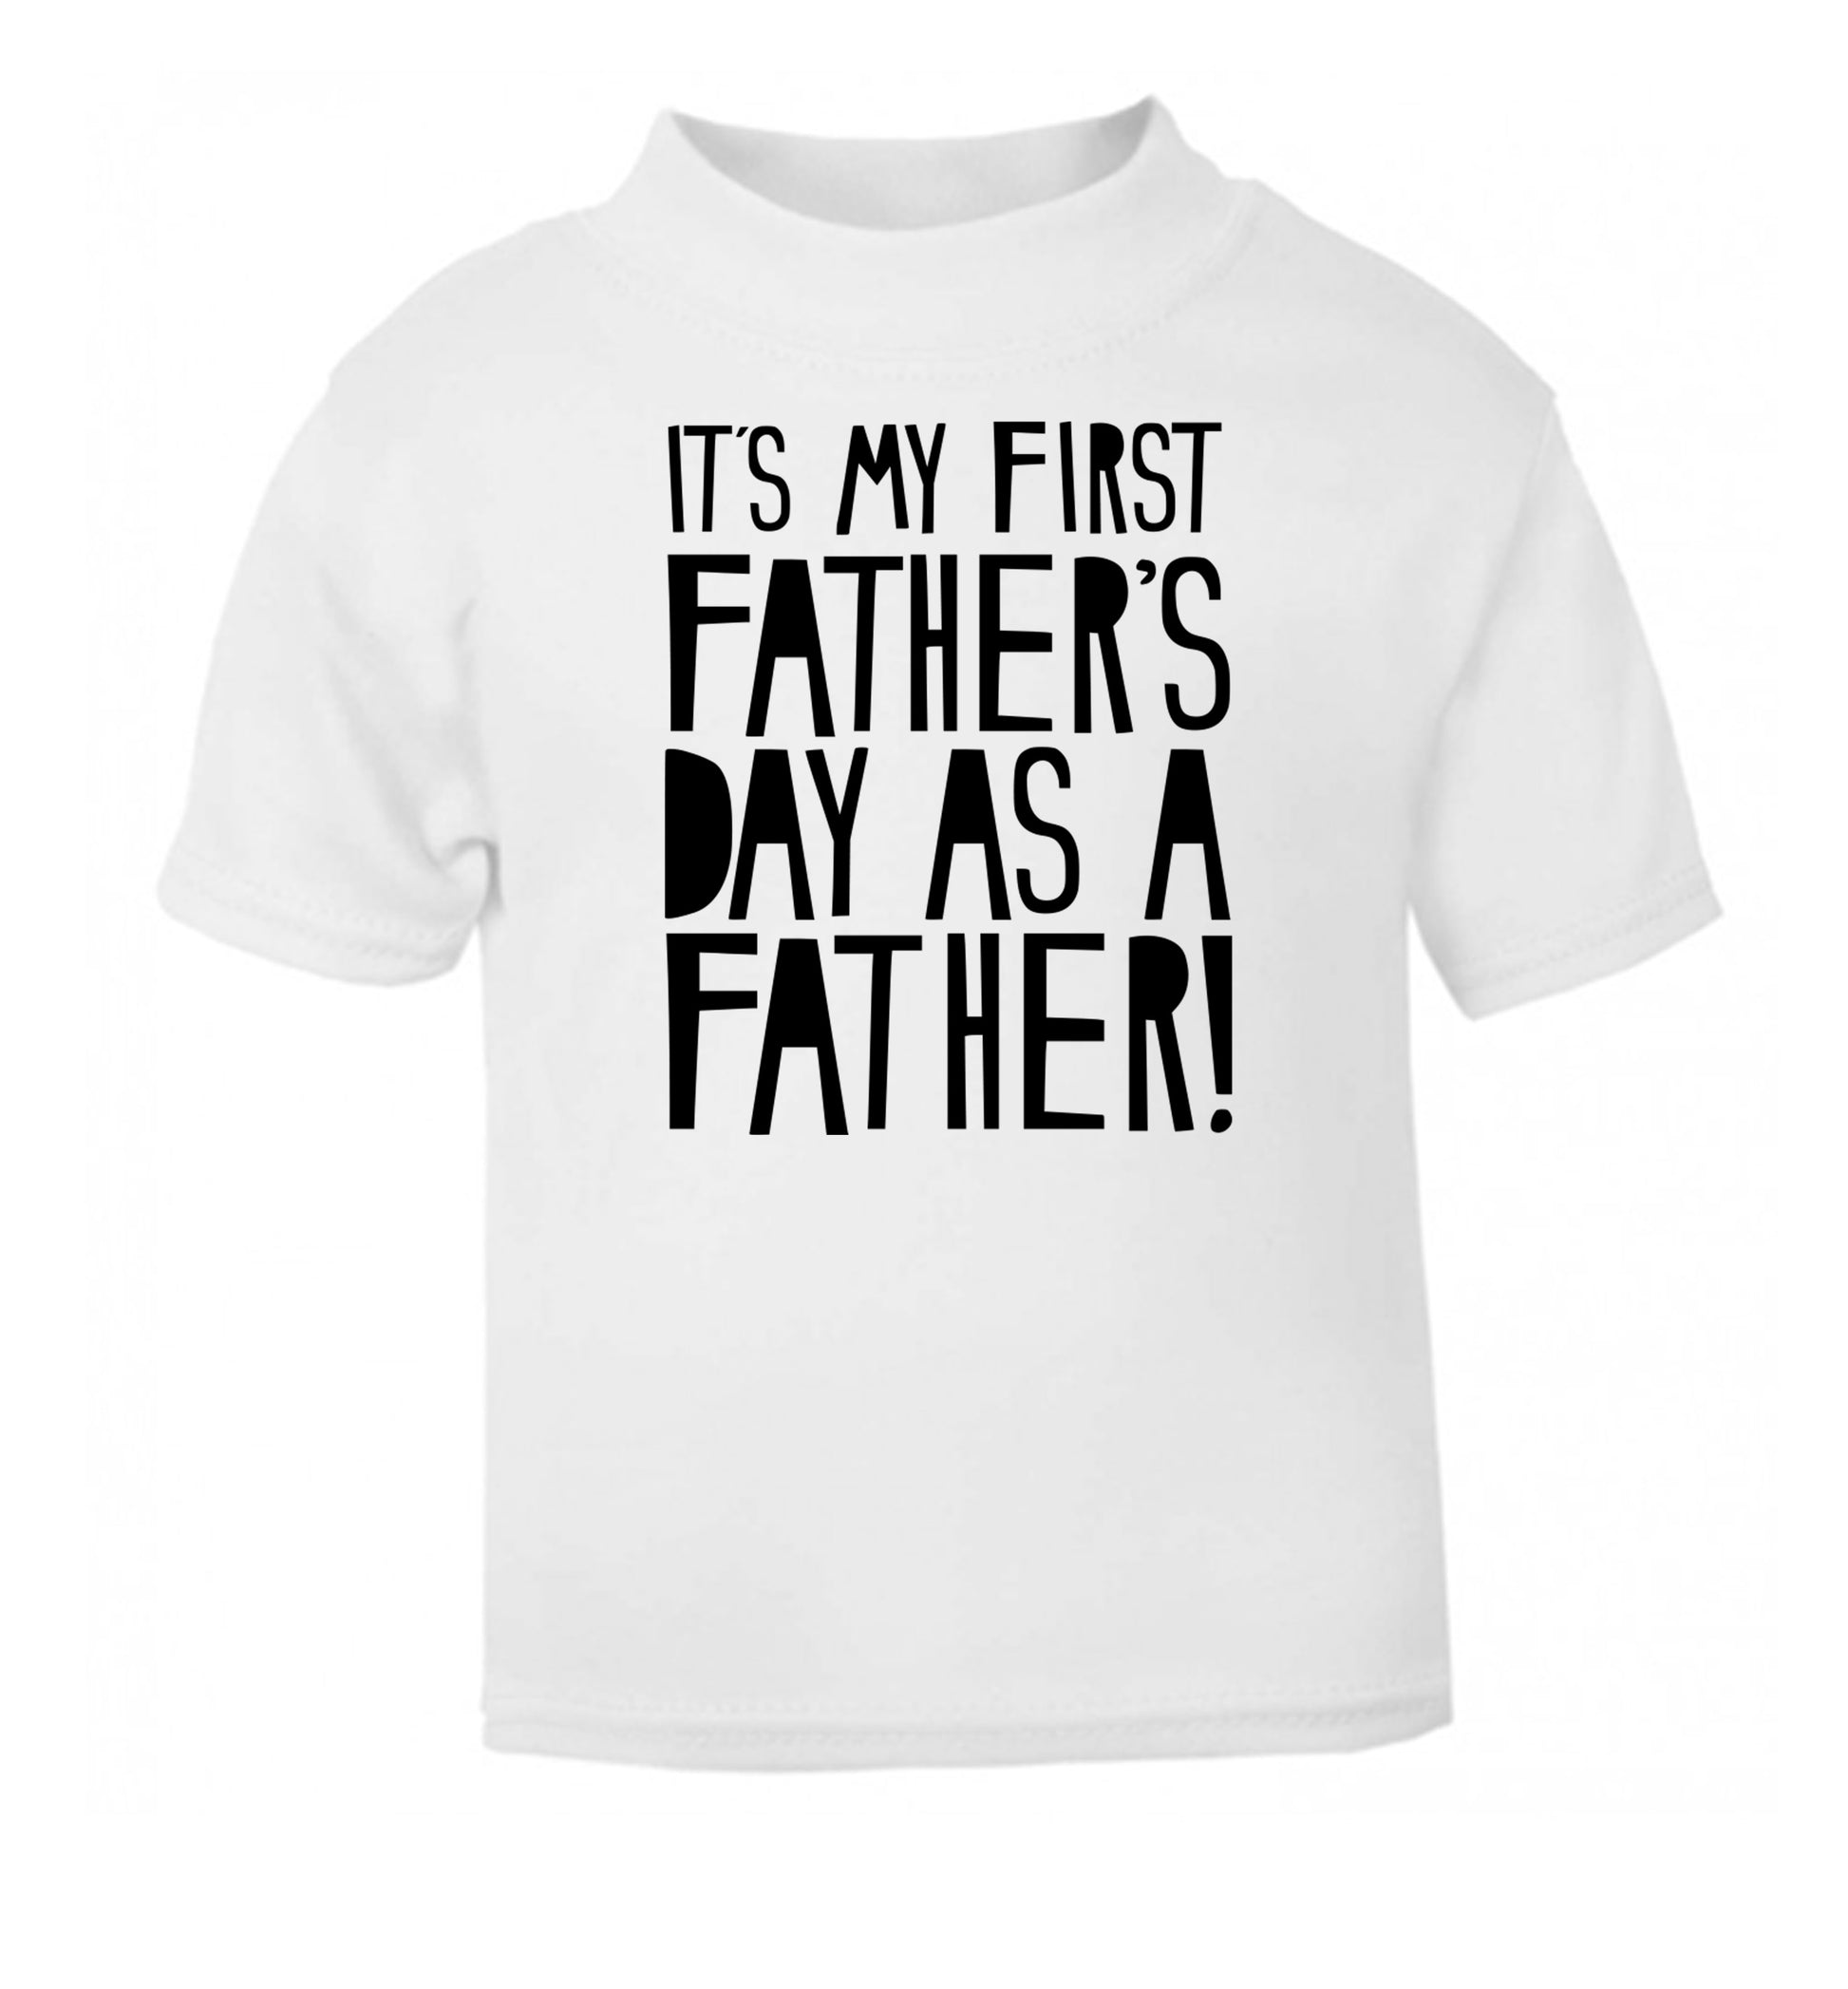 It's my first Father's Day as a father! white Baby Toddler Tshirt 2 Years